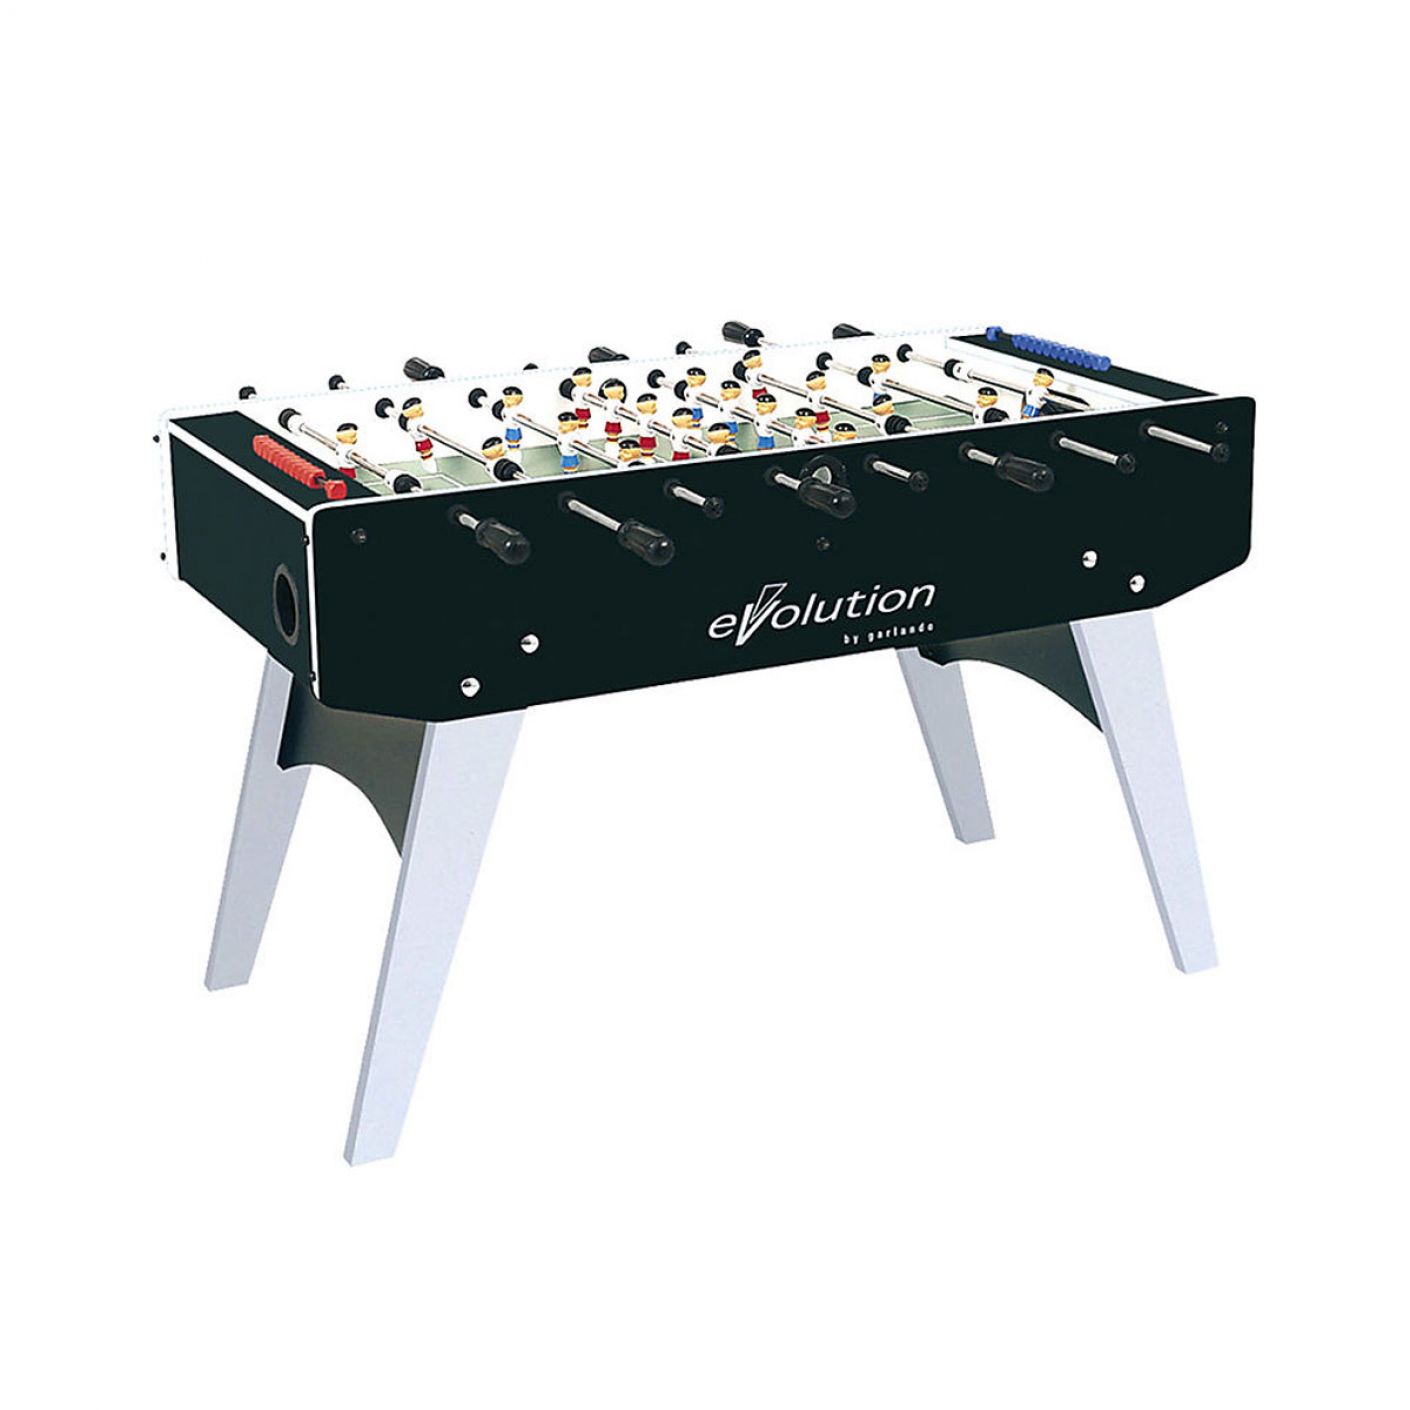 Garlando F-20 EVOLUTION table football with outgoing rods, folding legs